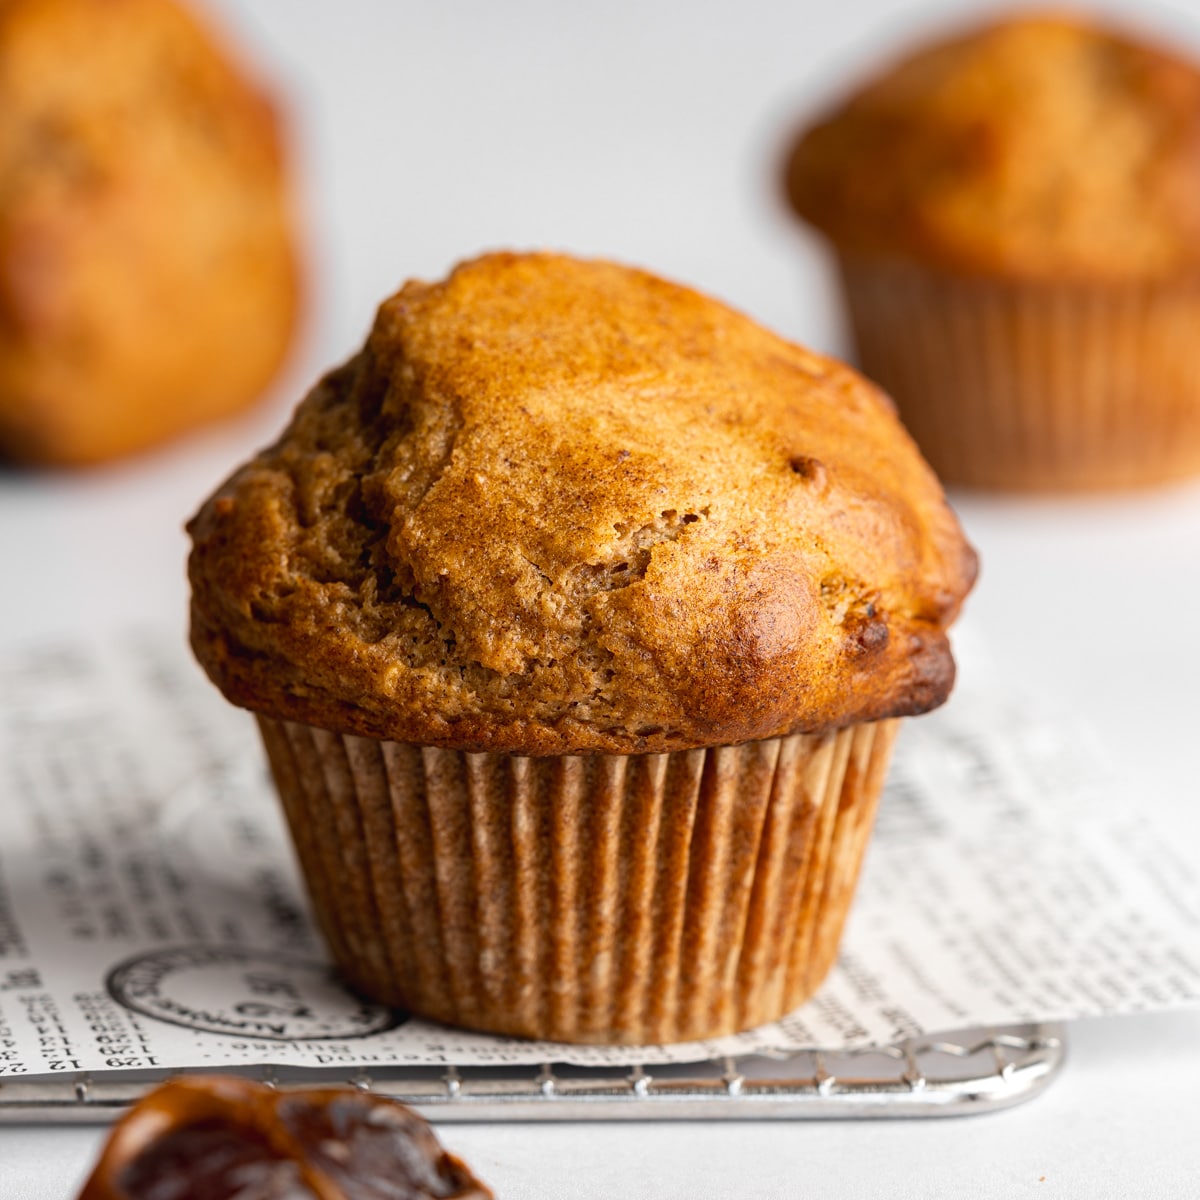 A date muffin with a tall chubby muffin top on a cooling rack.